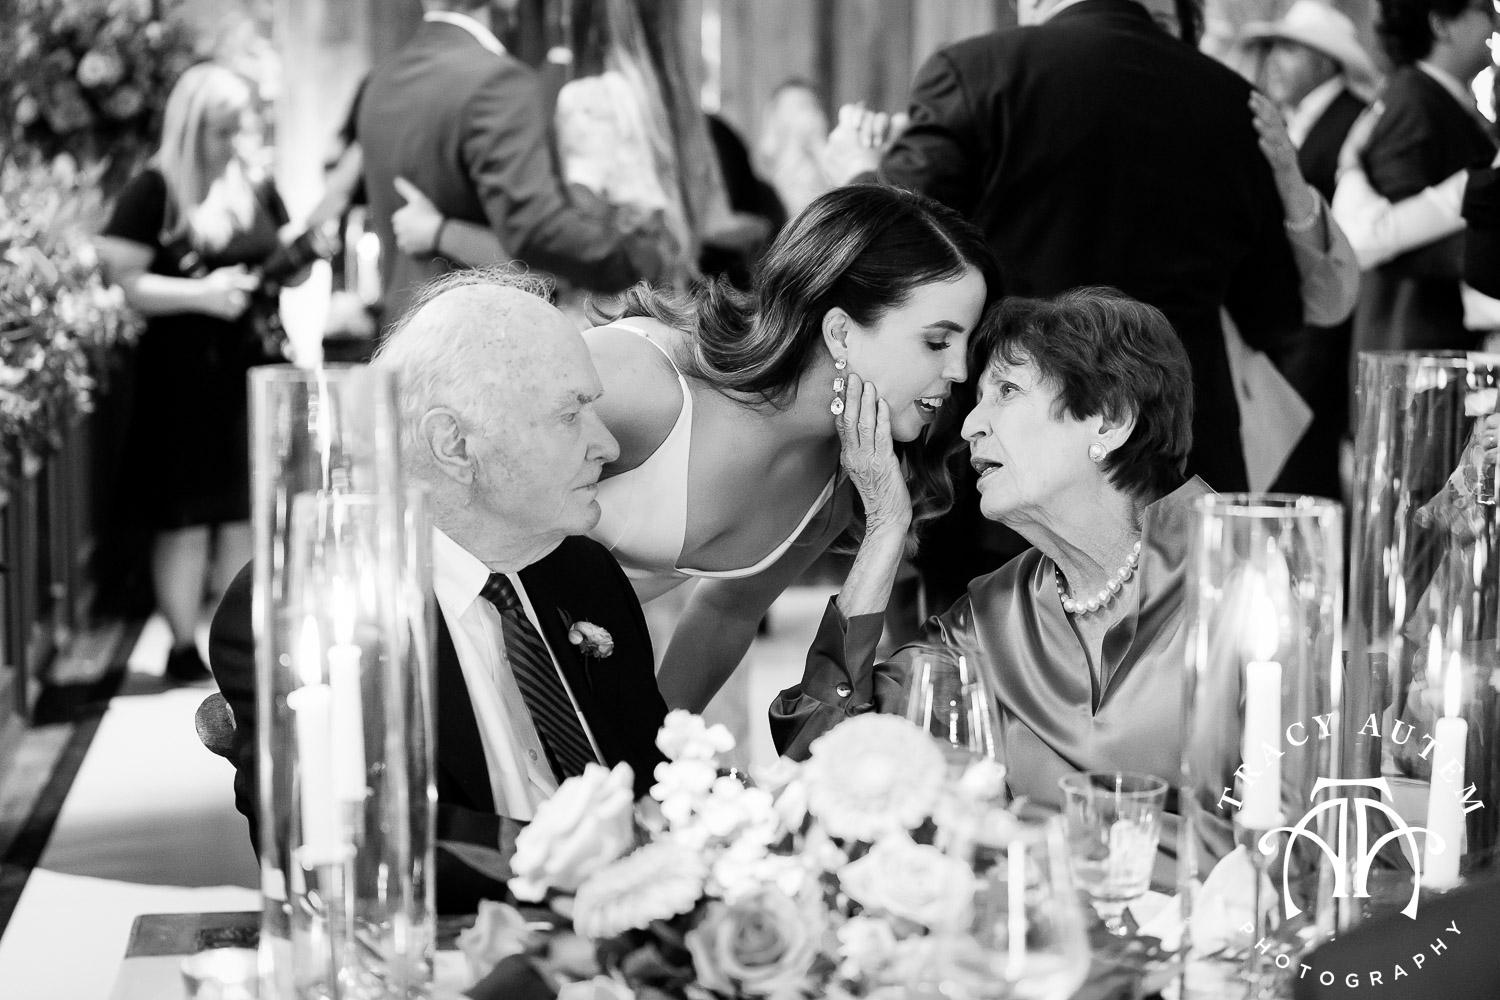 Sweet moment with bride and grandma at wedding reception